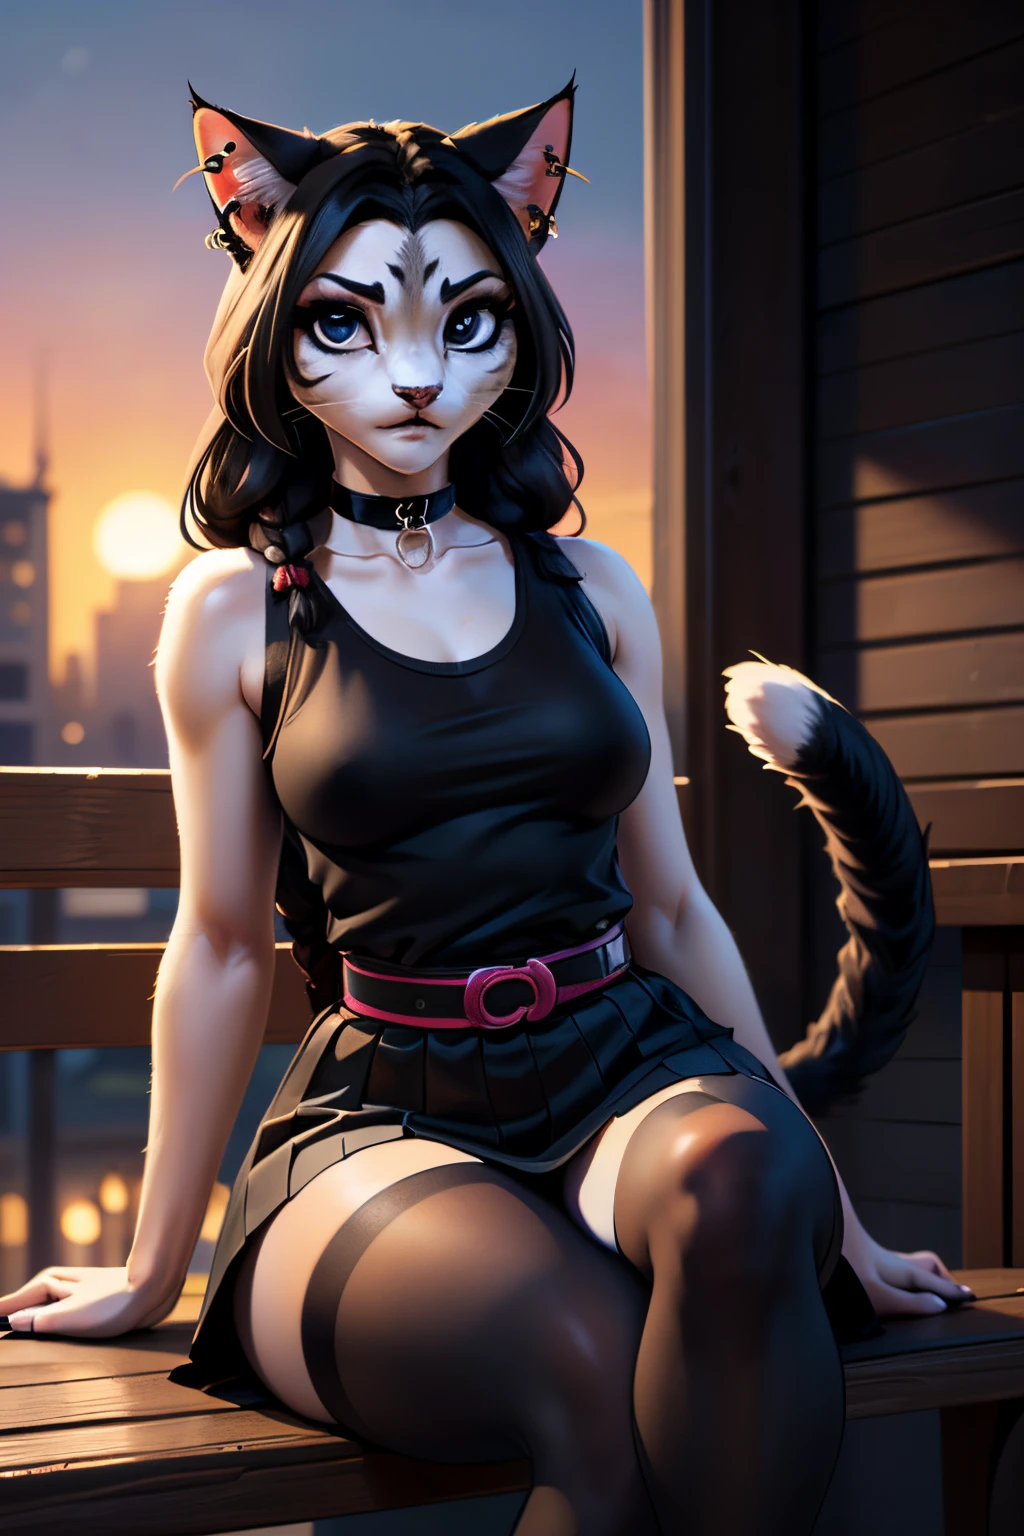 ((ultra quality)), ((tmasterpiece)), Girl-khajiit, goth, anthro cat, furry, ((black long hair tied in a braid)), ((there are piercings and rings in the ears)), ((there are only cat ears)), ((There is a cat's long tail in the back)), Beautiful cute face, beautiful female lips, charming beauty, ((serious expression)), is looking at the camera, ((Skin color: white)), ((there is cat hair on the body)), Body glare, ((detailed beautiful female eyes)), ((kblack eyes)), ((dark makeup)), beautiful female hands, ((perfect female figure)), ideal female body shapes, Beautiful waist, nice feet, big thighs, Beautiful butt, ((Subtle and beautiful)), sitting seductively on a bench ((closeup face)), ((wearing a black waist-length skirt with a black belt, black sleeveless tank top, black choker around the neck, black sneakers, black tights), background: City Street, evening sunset, ((Depth of field)), ((high quality clear image)), ((crisp details)), ((higly detailed)), Realistic, Professional Photo Session, ((Clear Focus)), ((cartoon)), the anime, NSFW